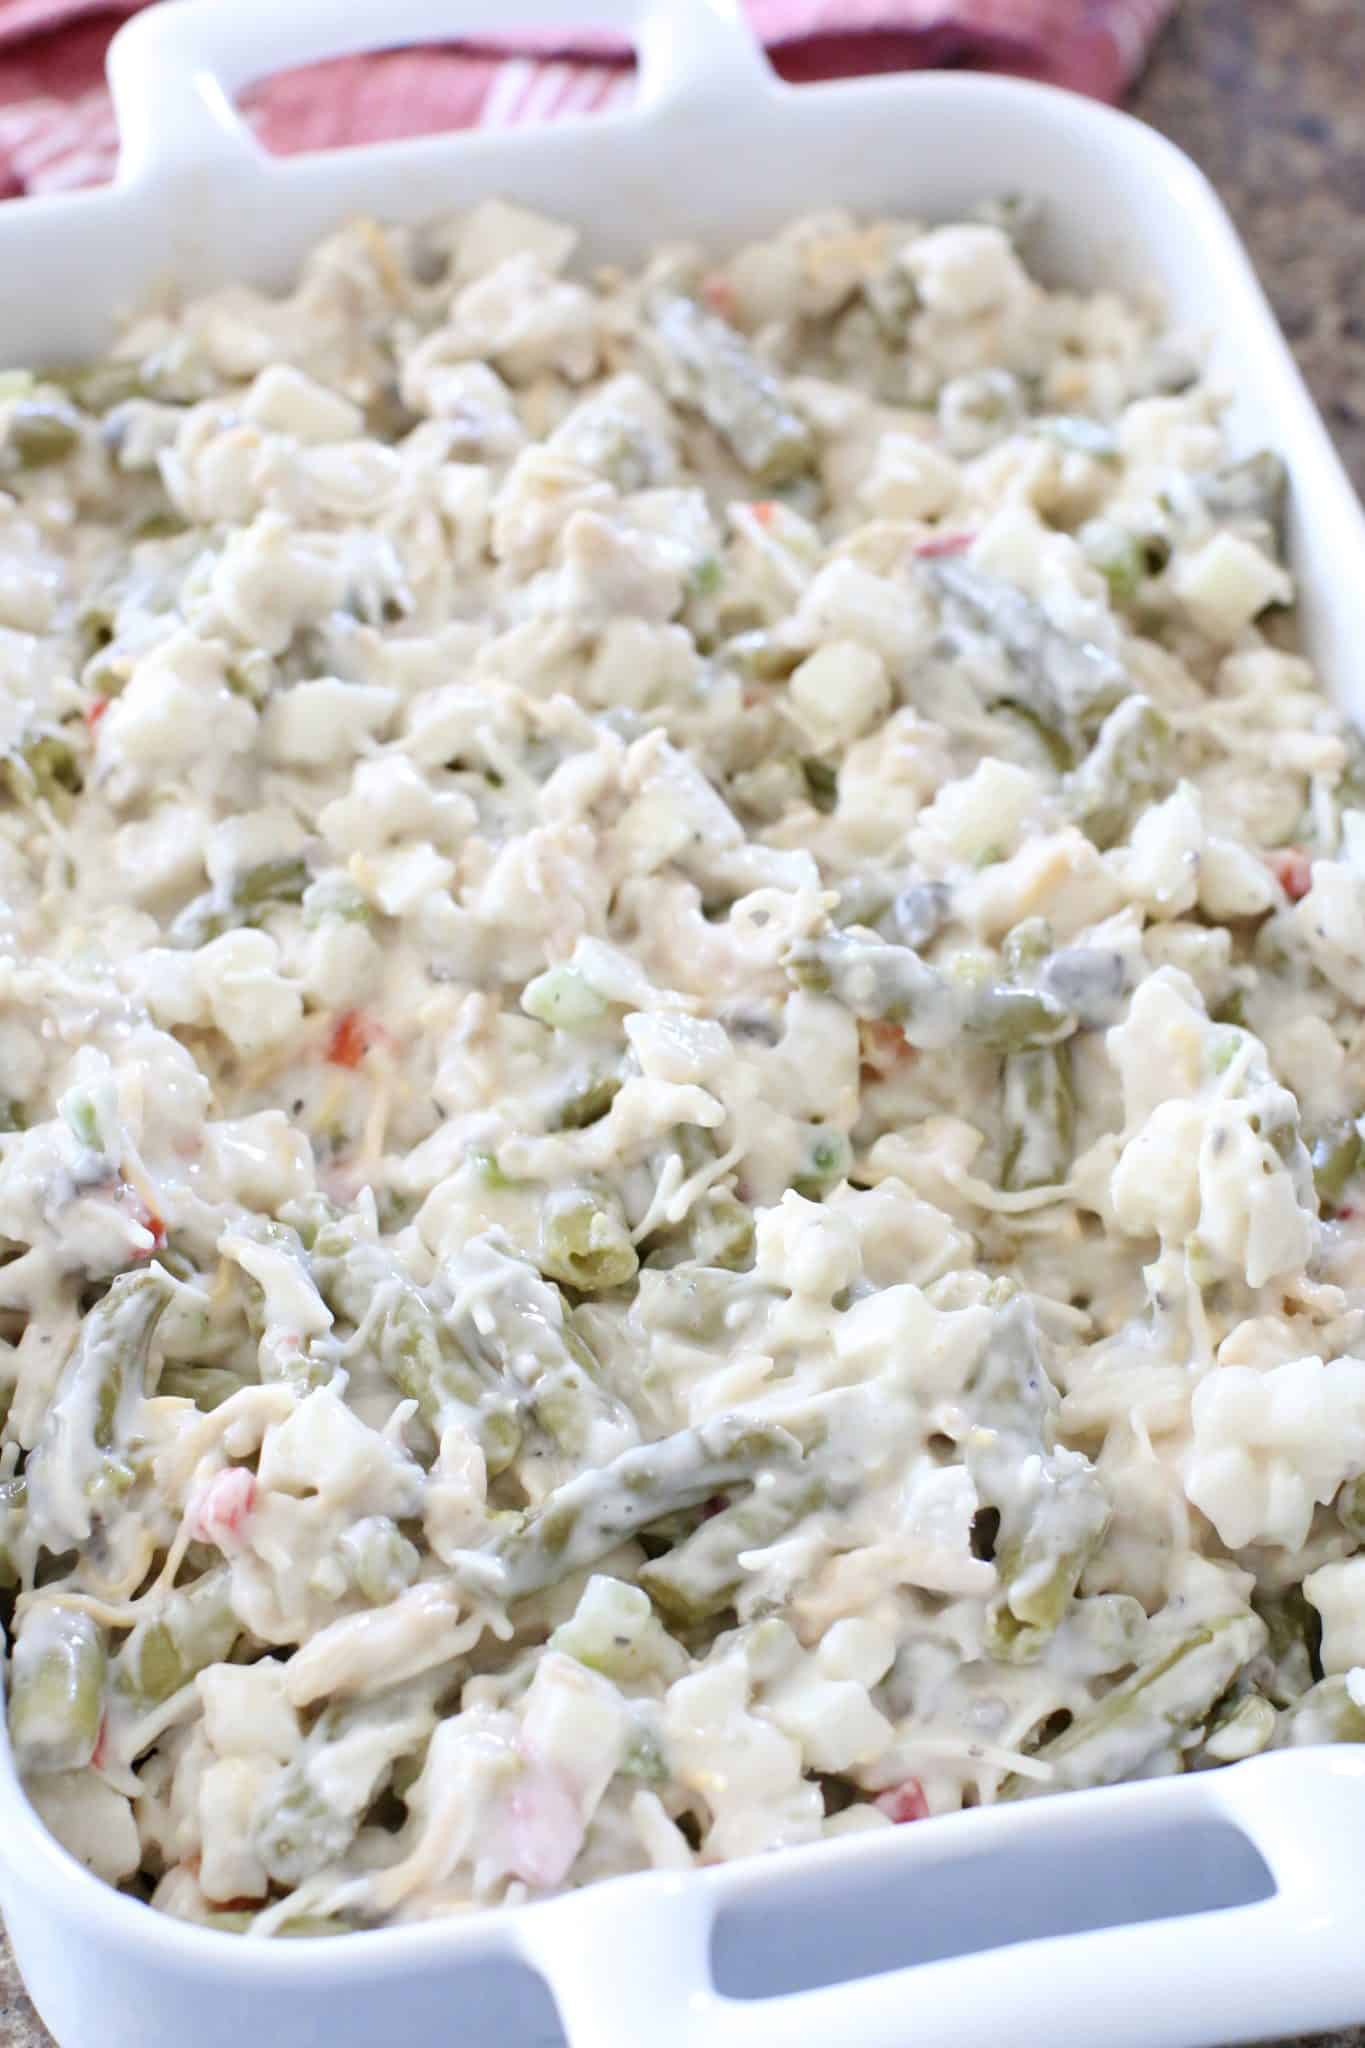 uncooked green bean casserole mixture spread out evenly in a rectangular white baking dish.